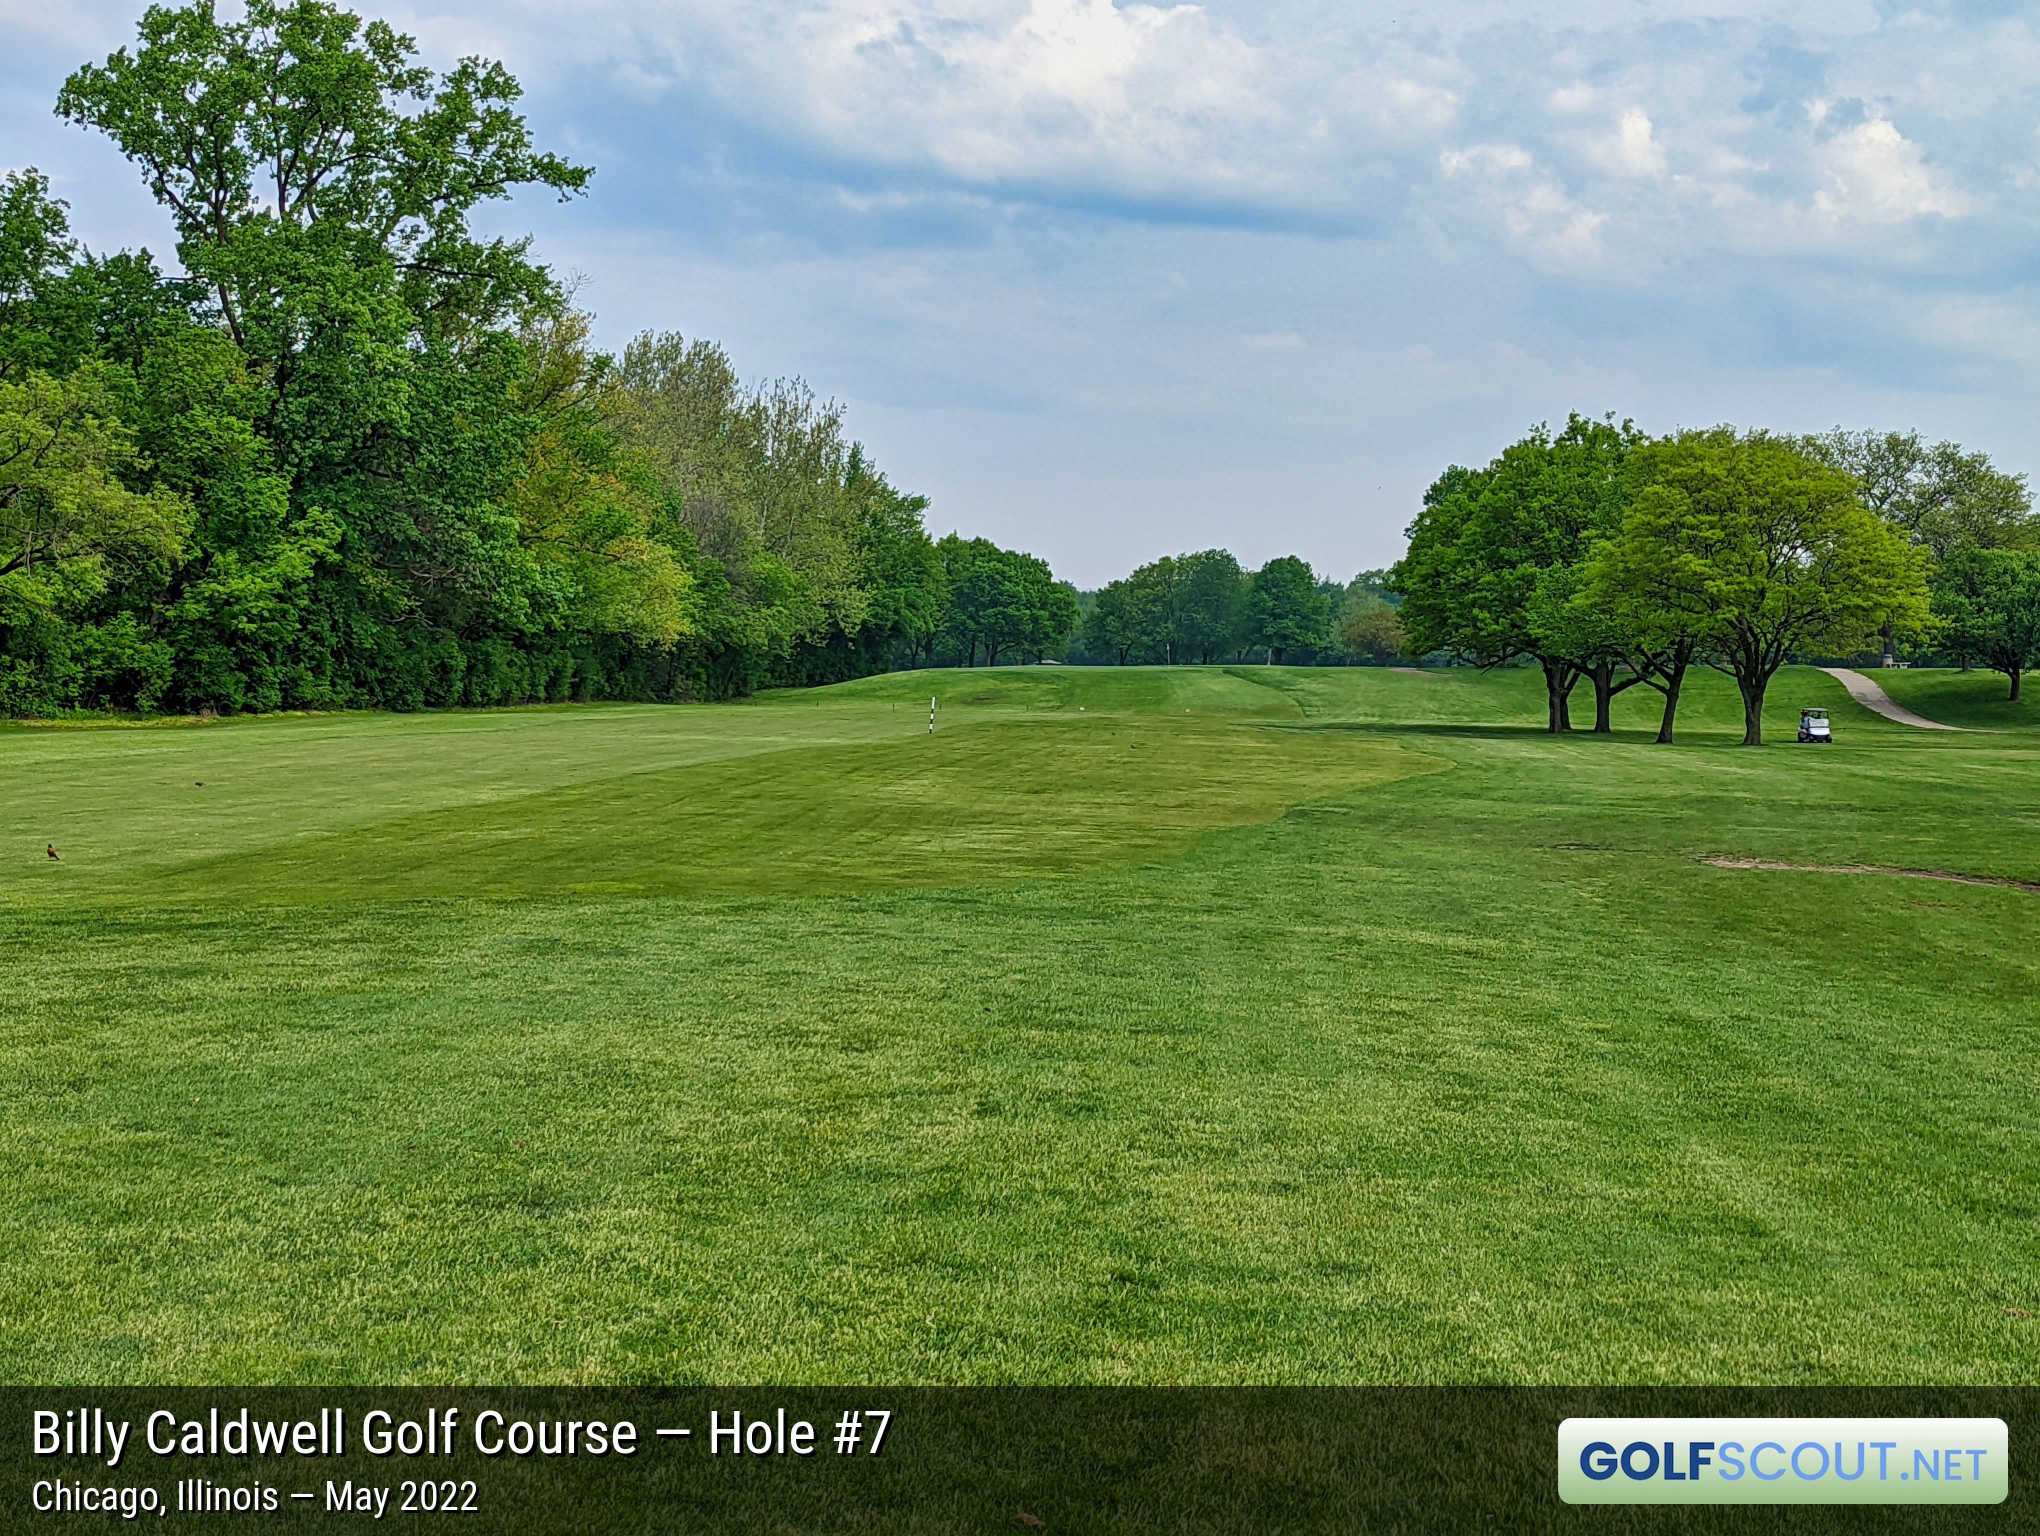 Photo of hole #7 at Billy Caldwell Golf Course in Chicago, Illinois. 